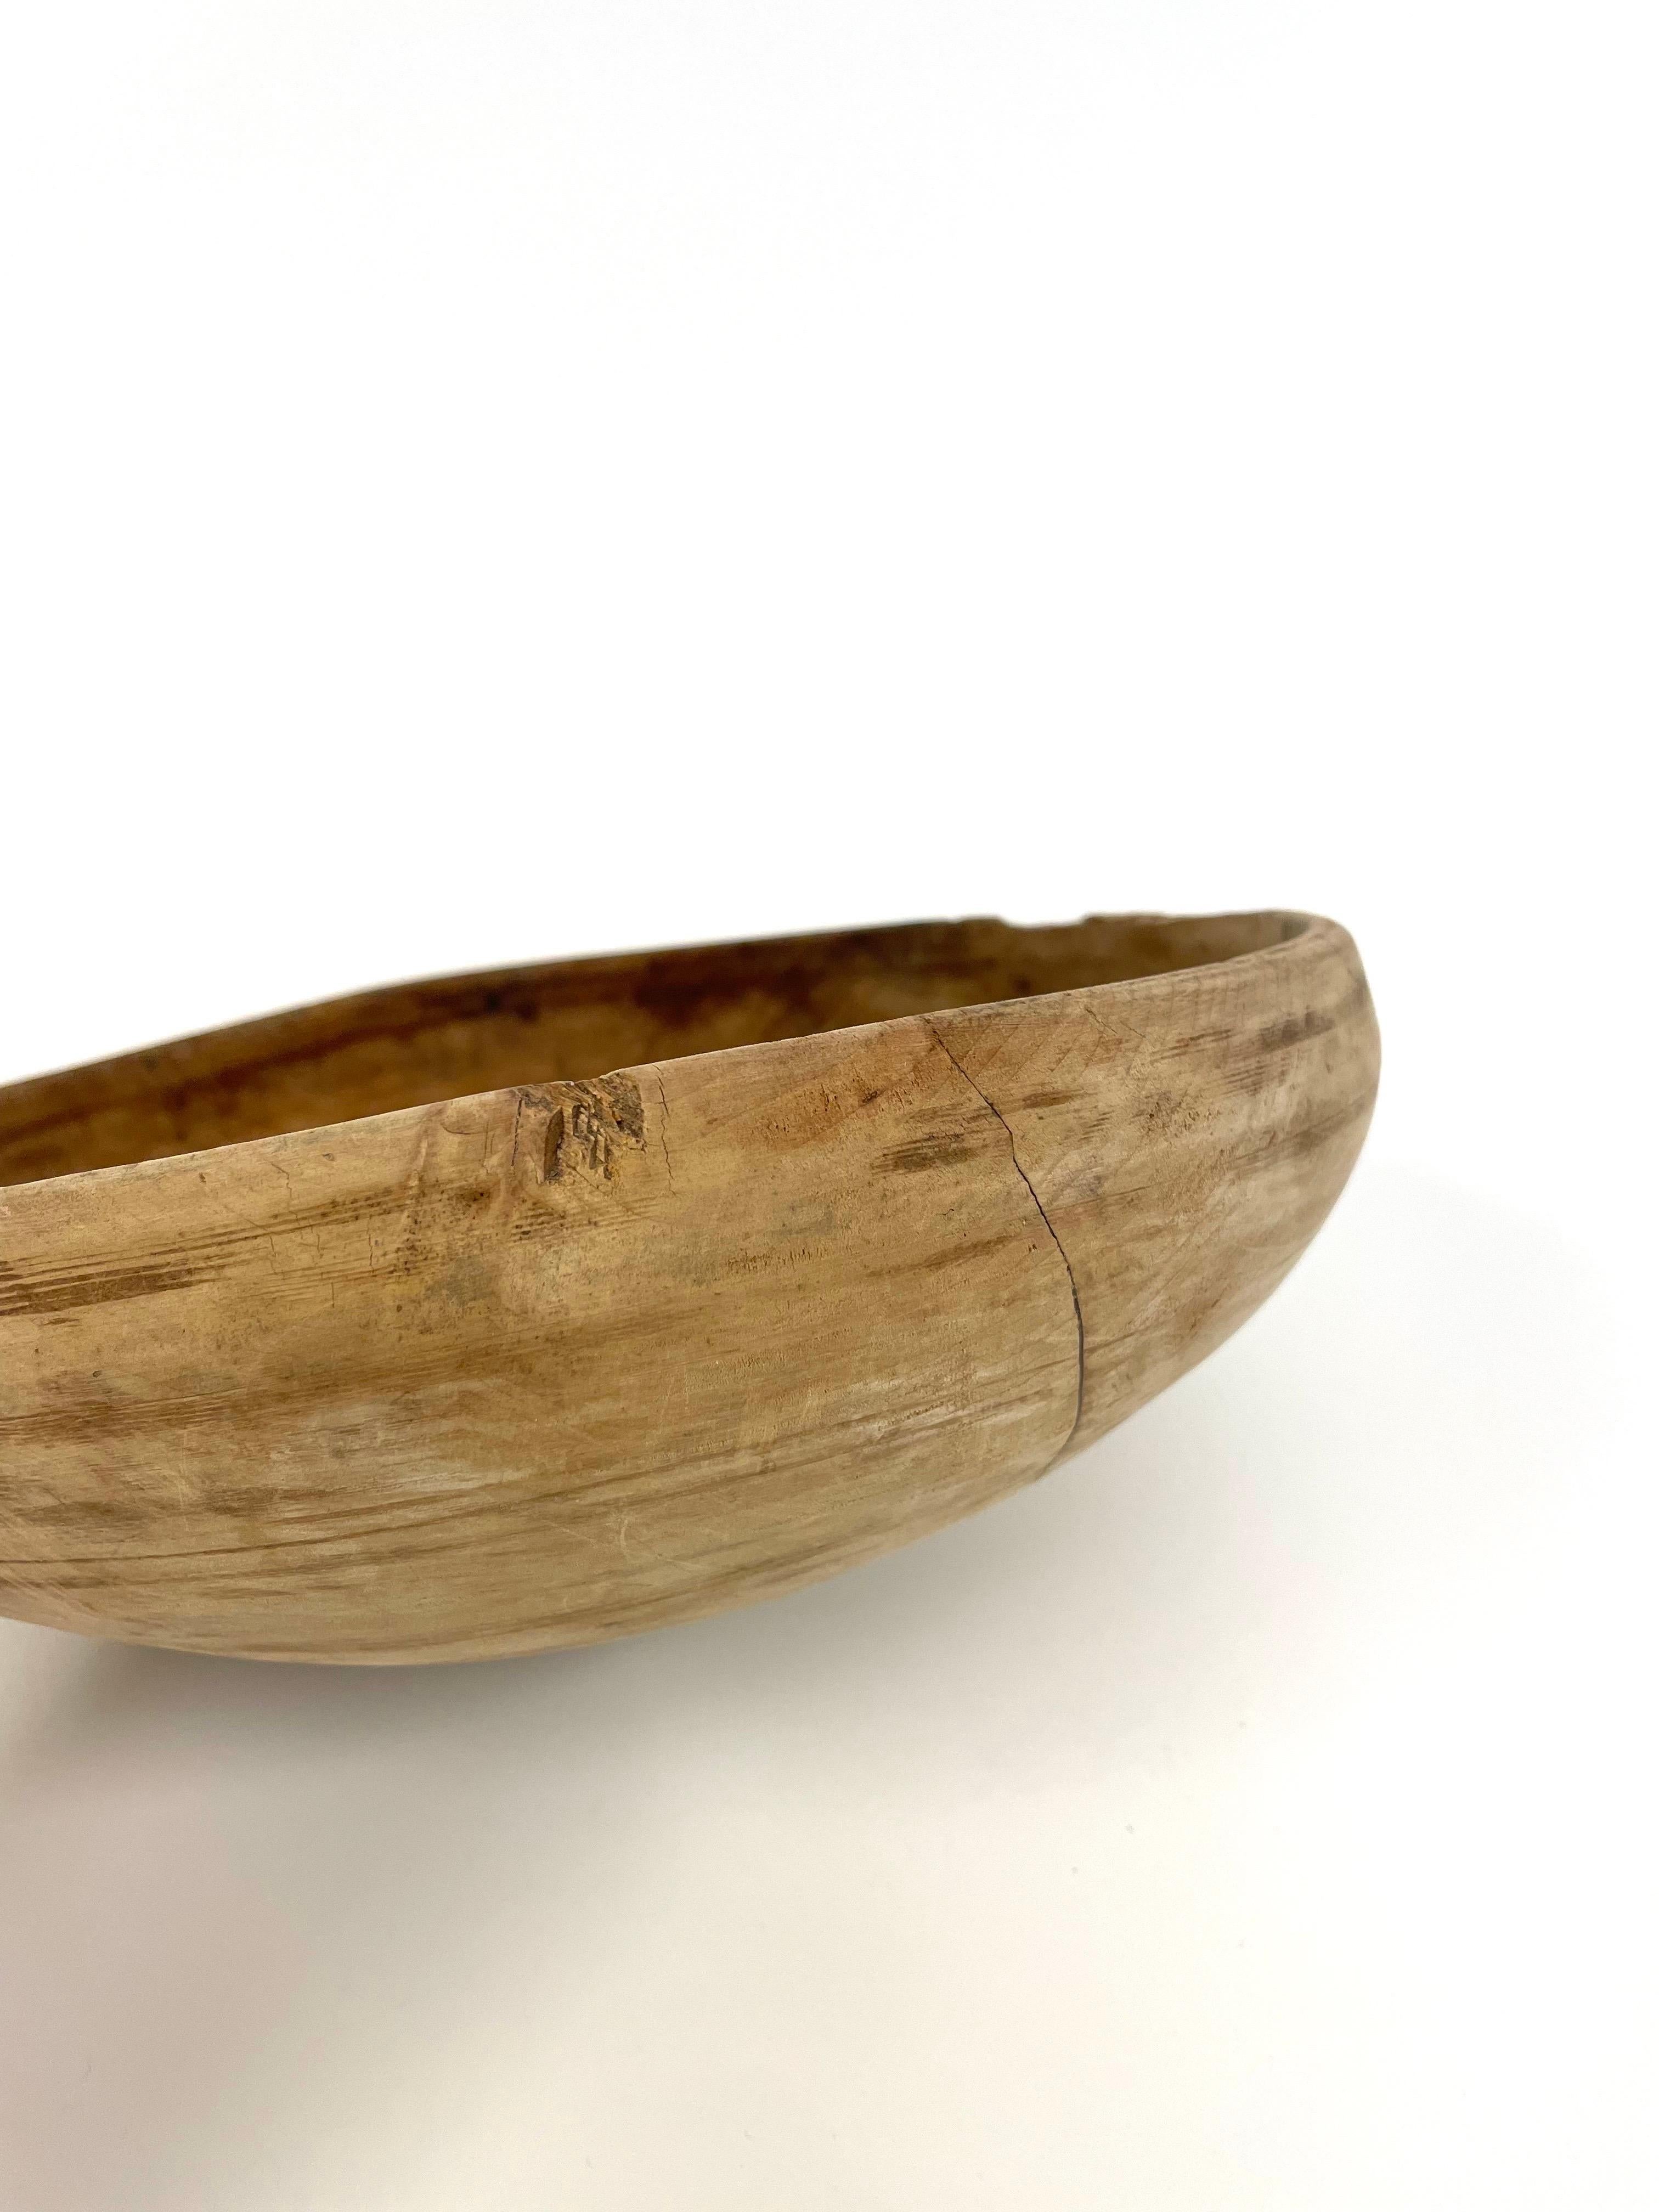 Swedish Hand-Krafted Turned 19th Century Wooden Folk Art Wooden Bowl in Pine  For Sale 1